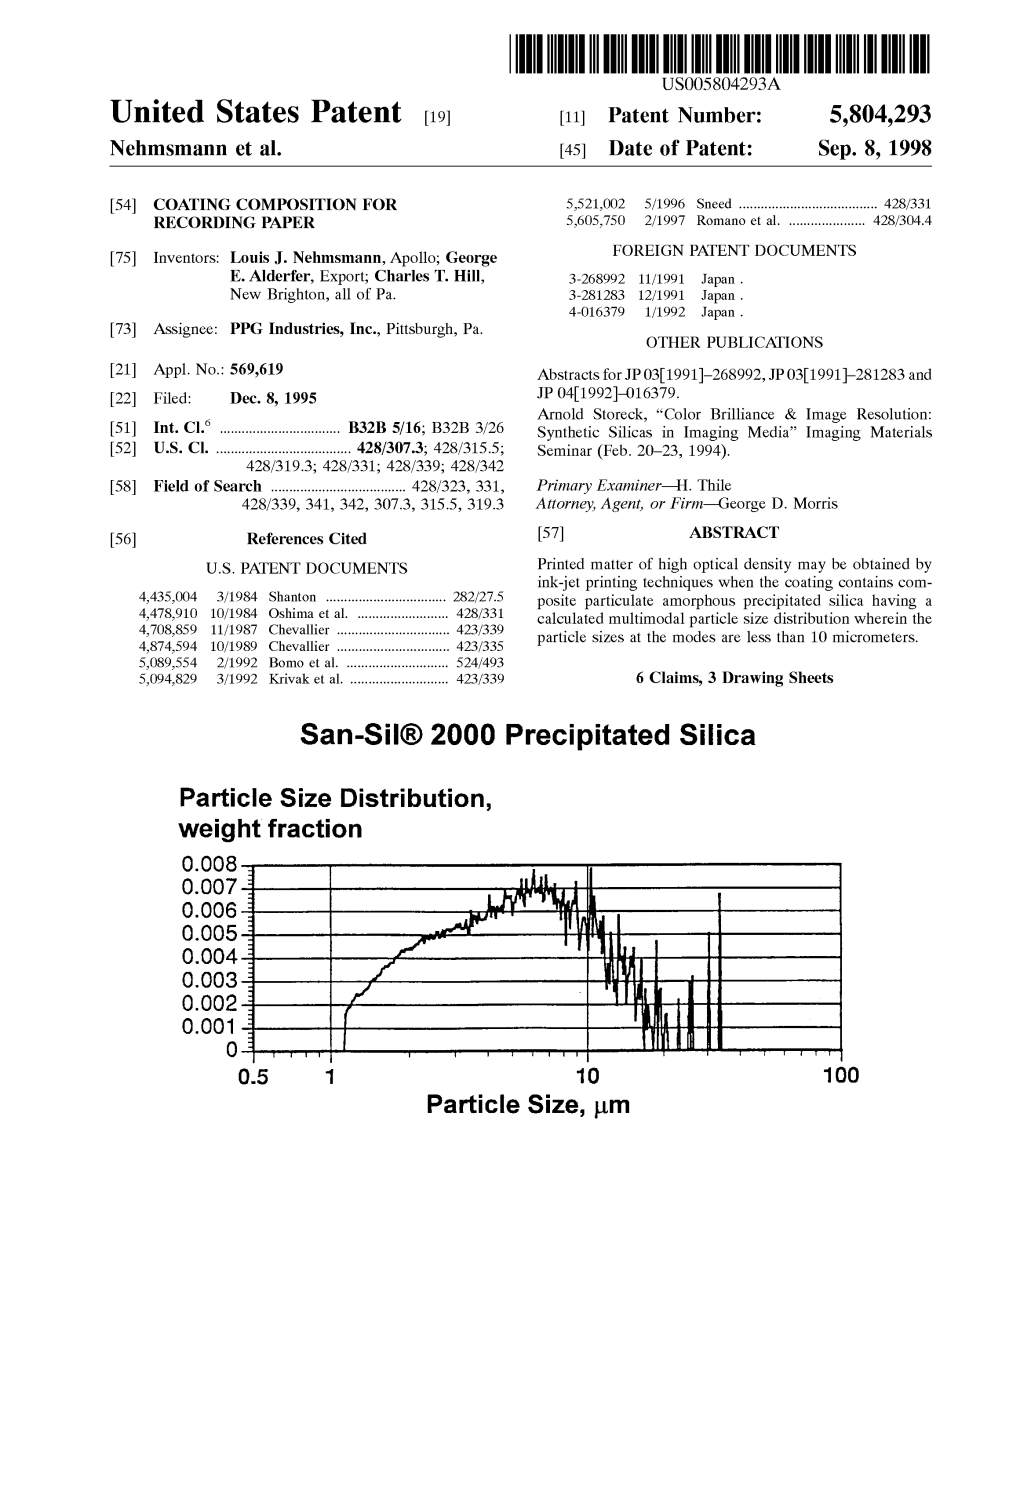 San-Sil(8) 2000 Precipitated Silica Particle Size Distribution, Weight Fraction